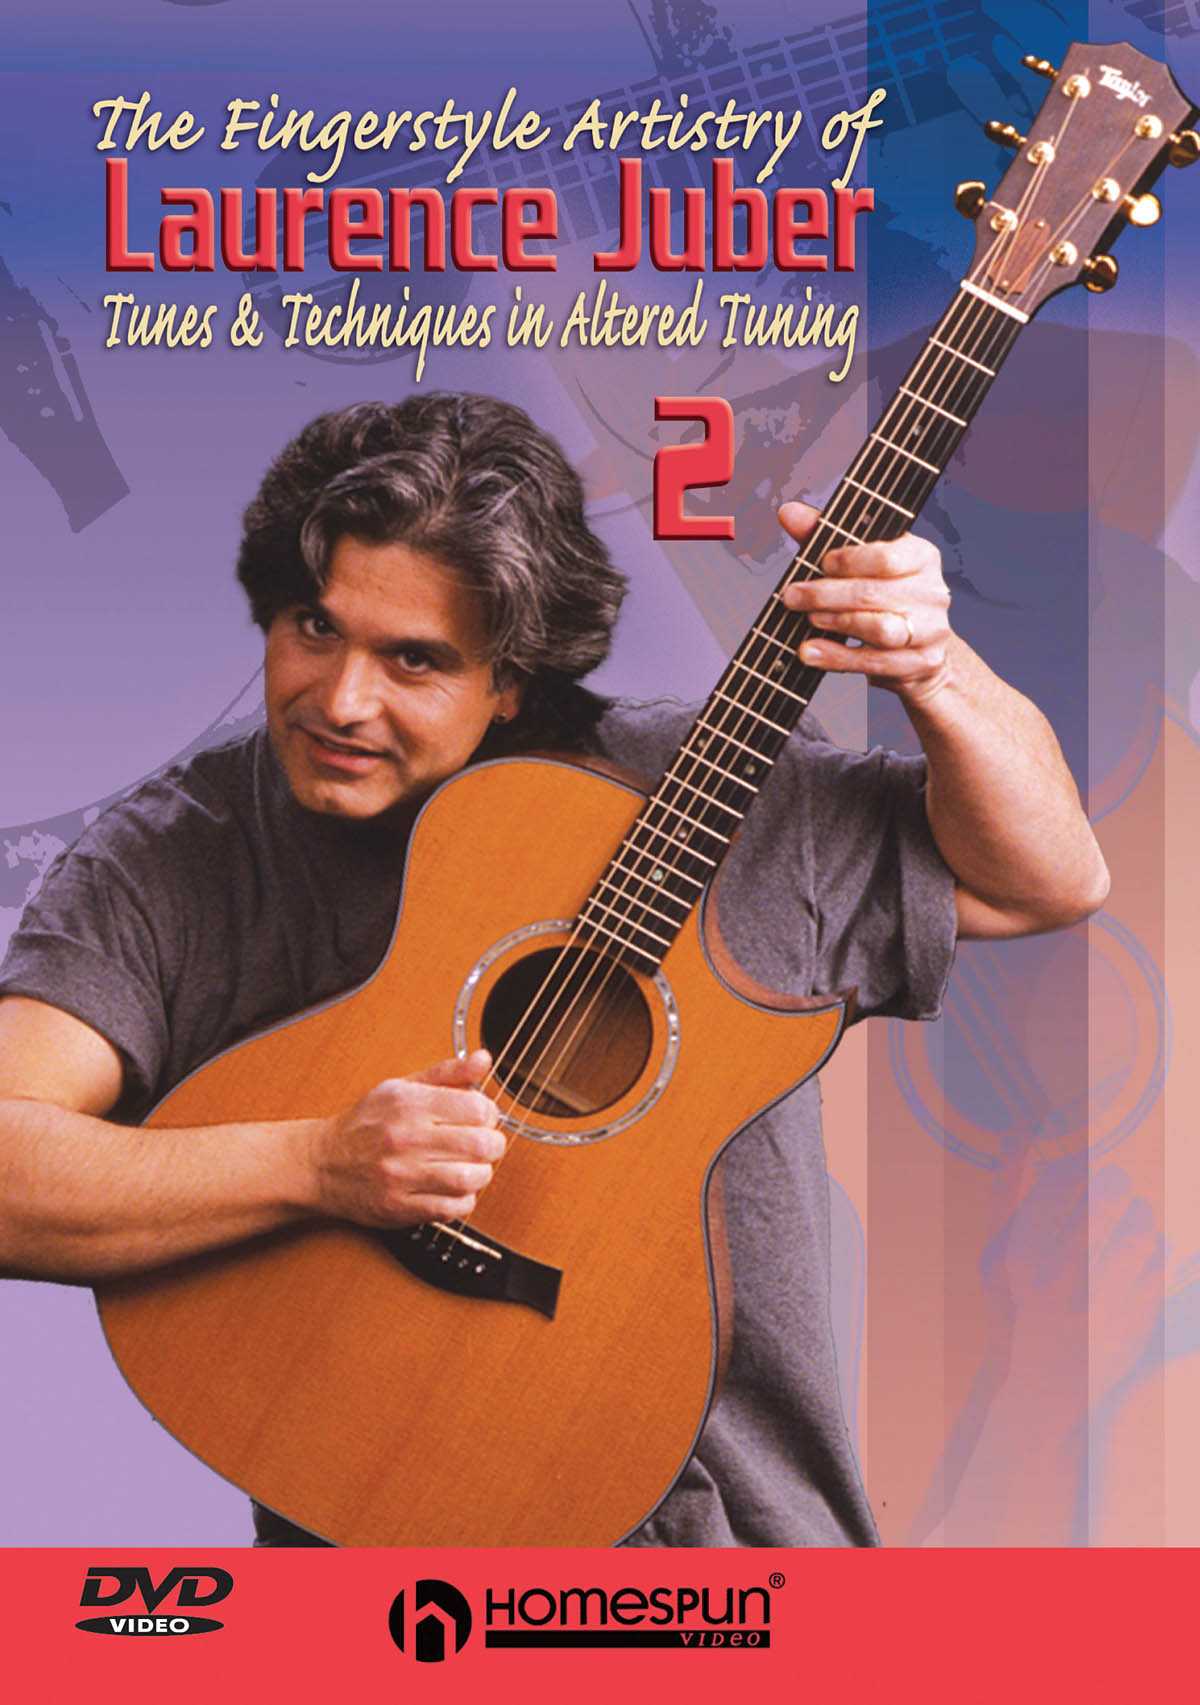 Image 1 of DVD-The Fingerstyle Artistry of Laurence Juber: Vol. 2 - Tunes and Techniques in Altered Tuning - SKU# 300-DVD265 : Product Type Media : Elderly Instruments